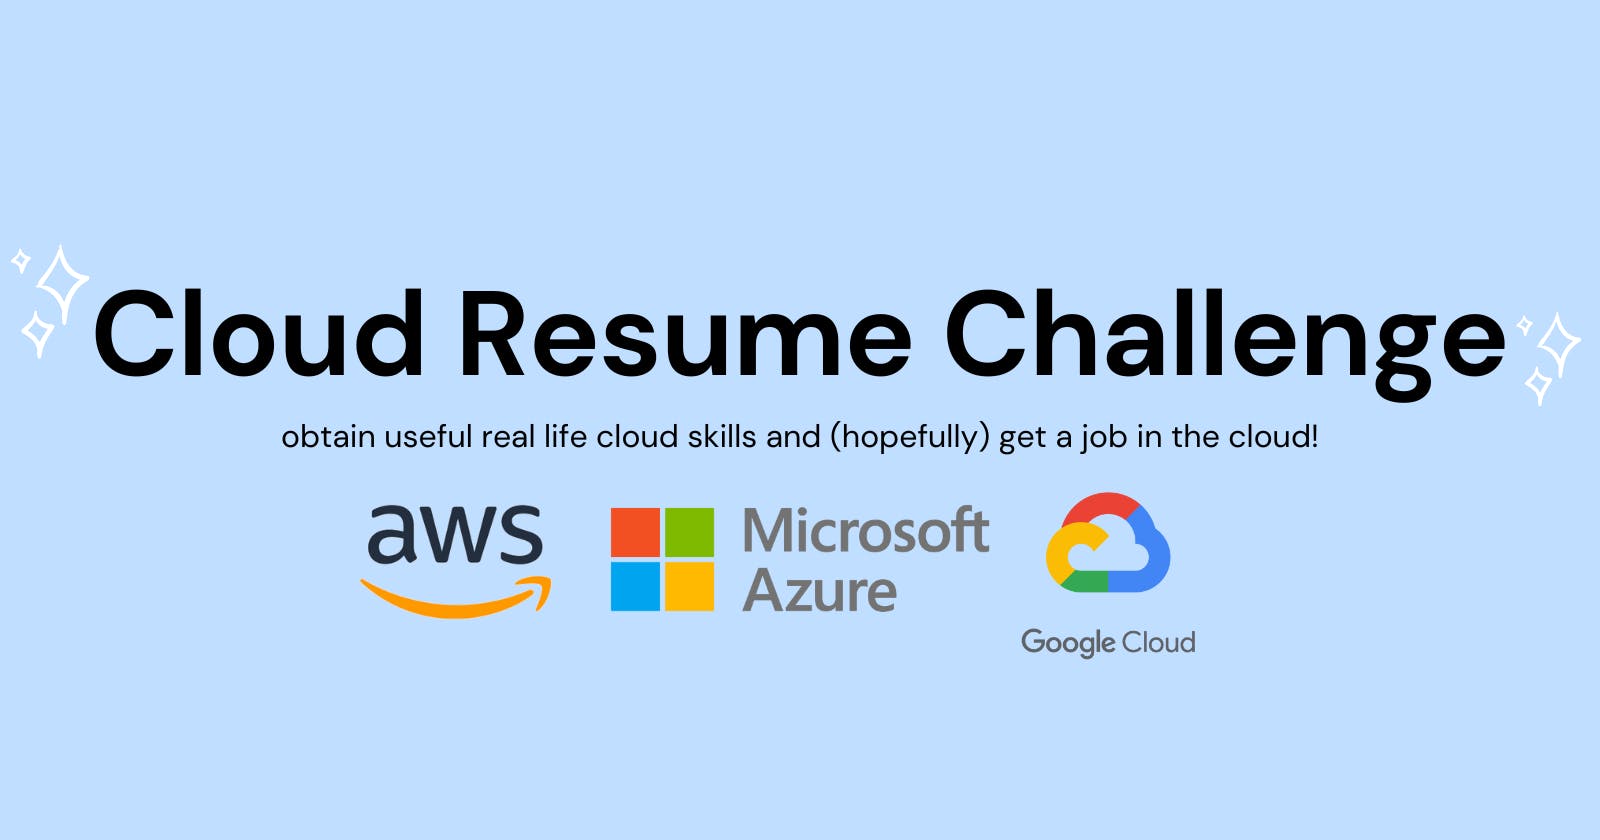 Cloud Resume Challenge by Forrest Brazeal